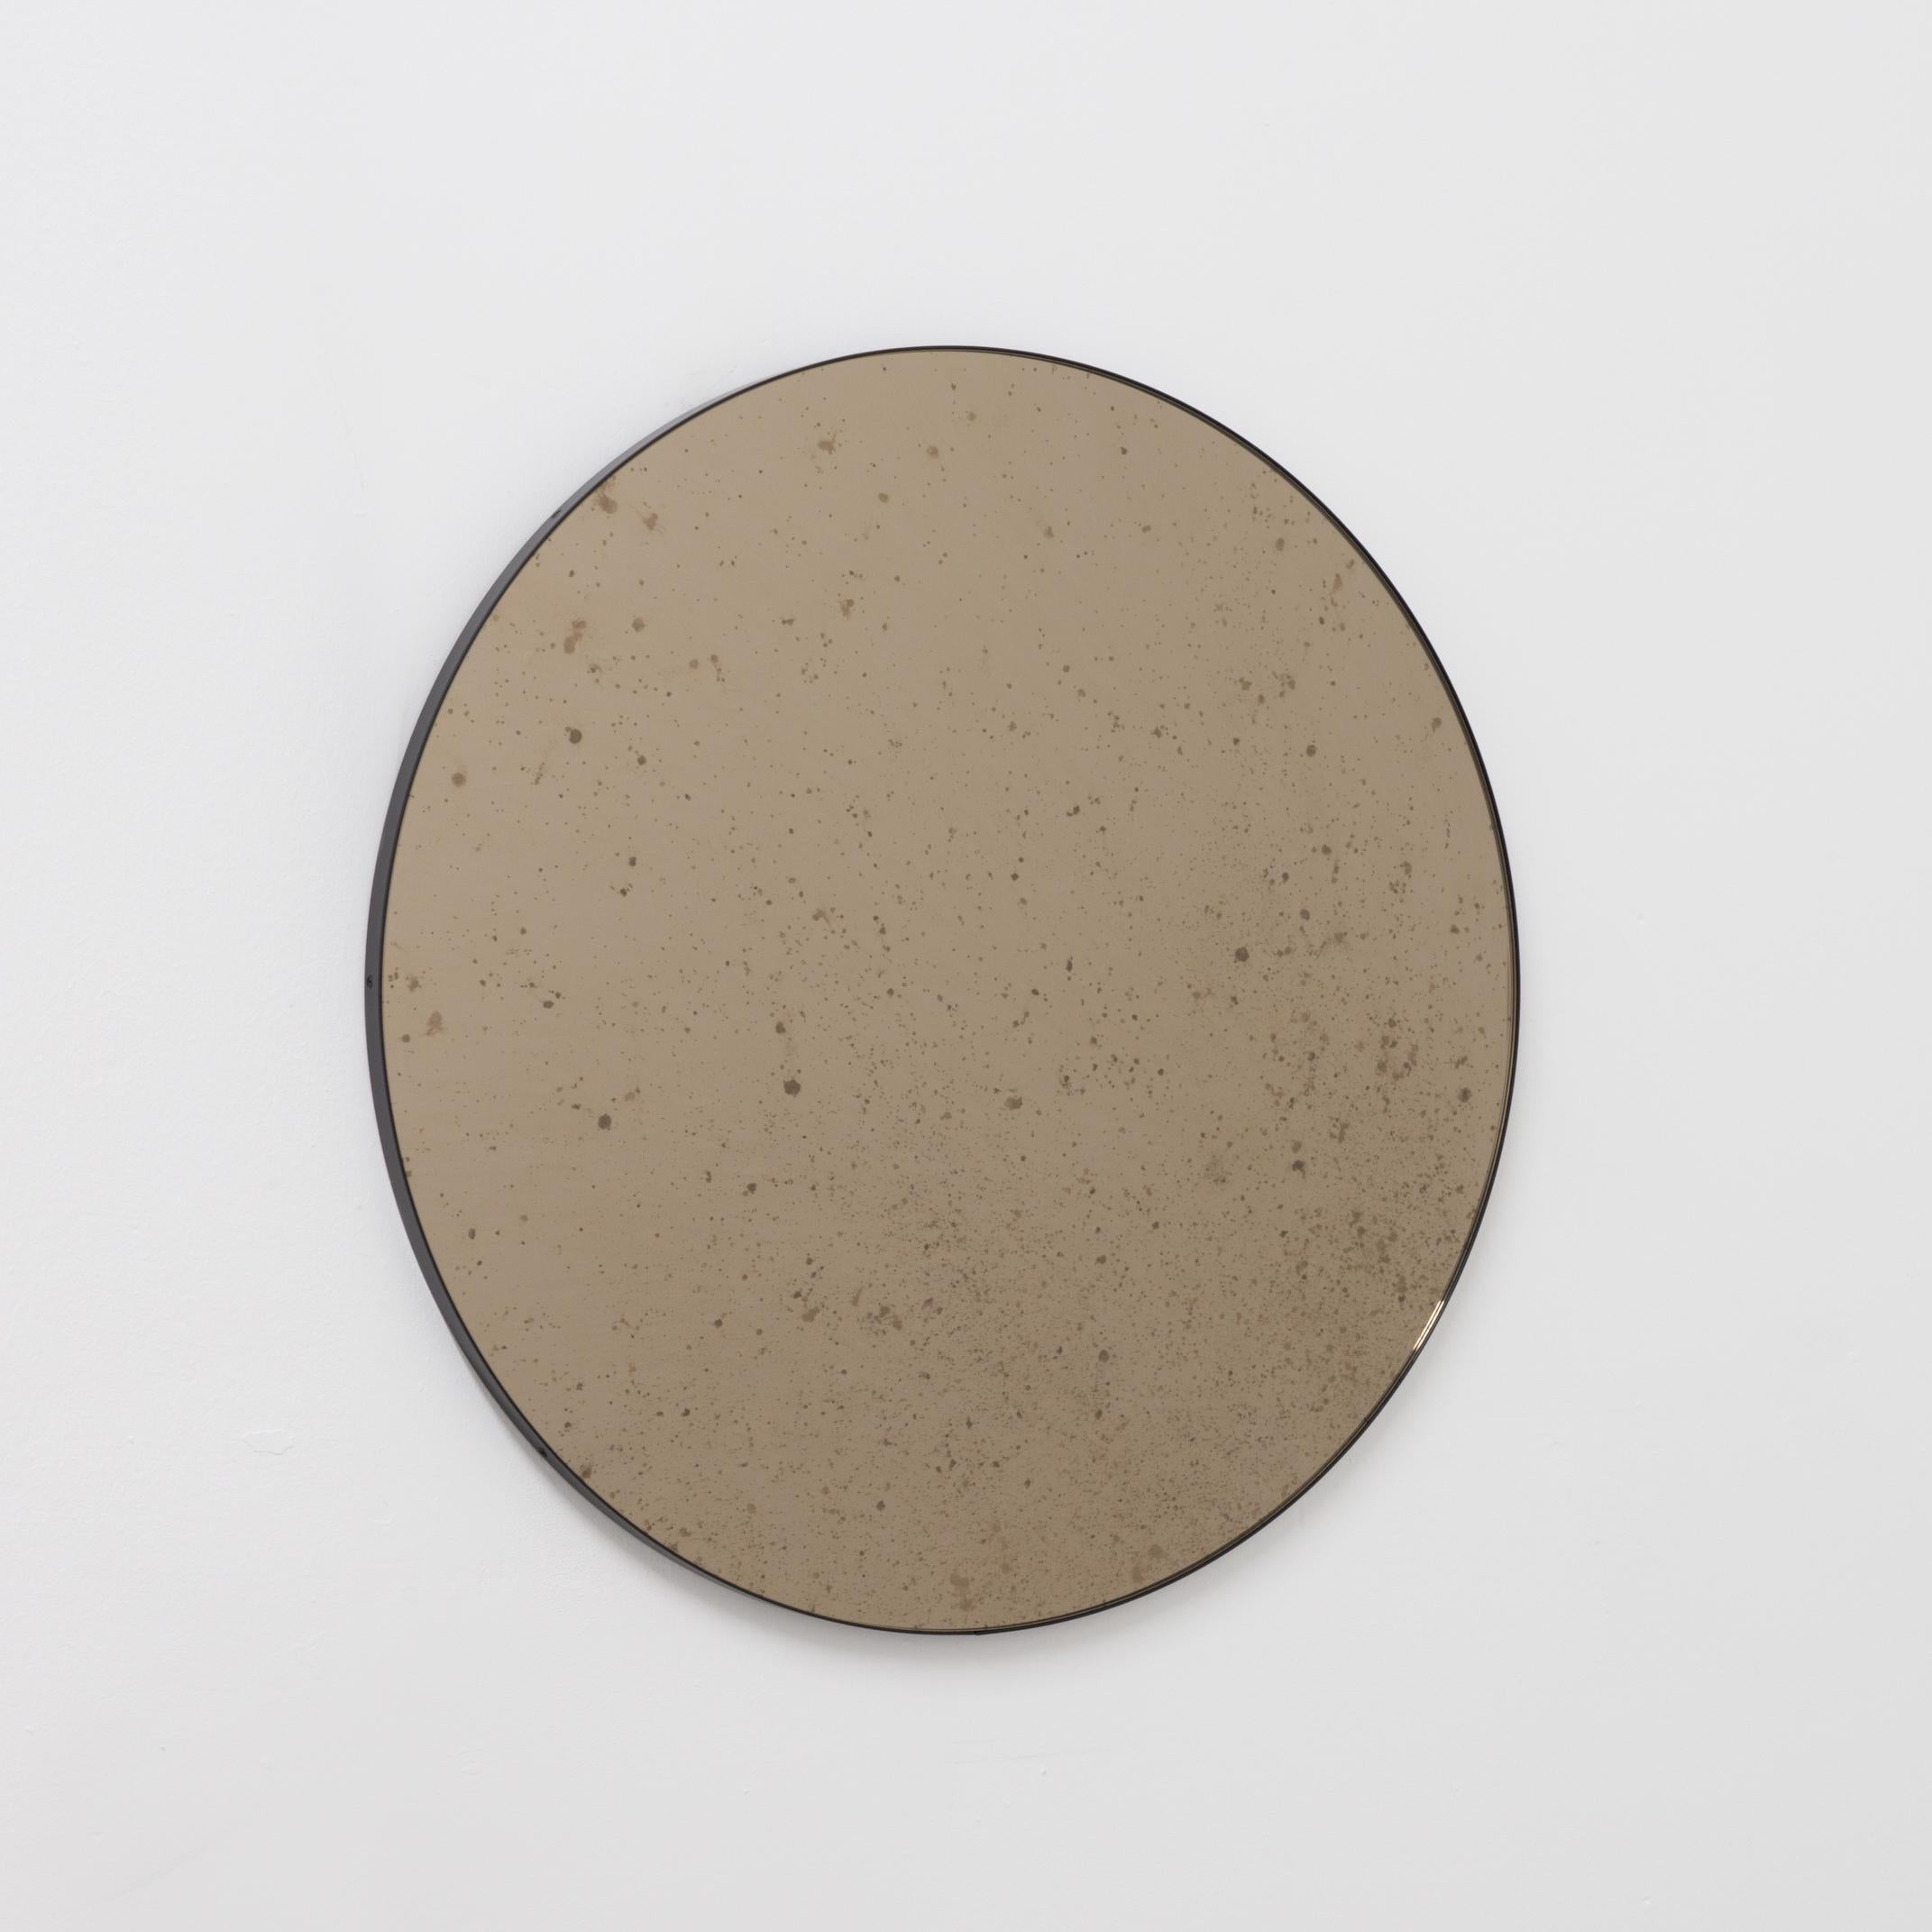 Art Deco inspired antiqued Orbis™ round bronze tinted mirror with a minimalist black aluminium powder coated frame. Designed and handcrafted in London, UK.

Our mirrors are designed with an integrated French cleat (split batten) system that ensures